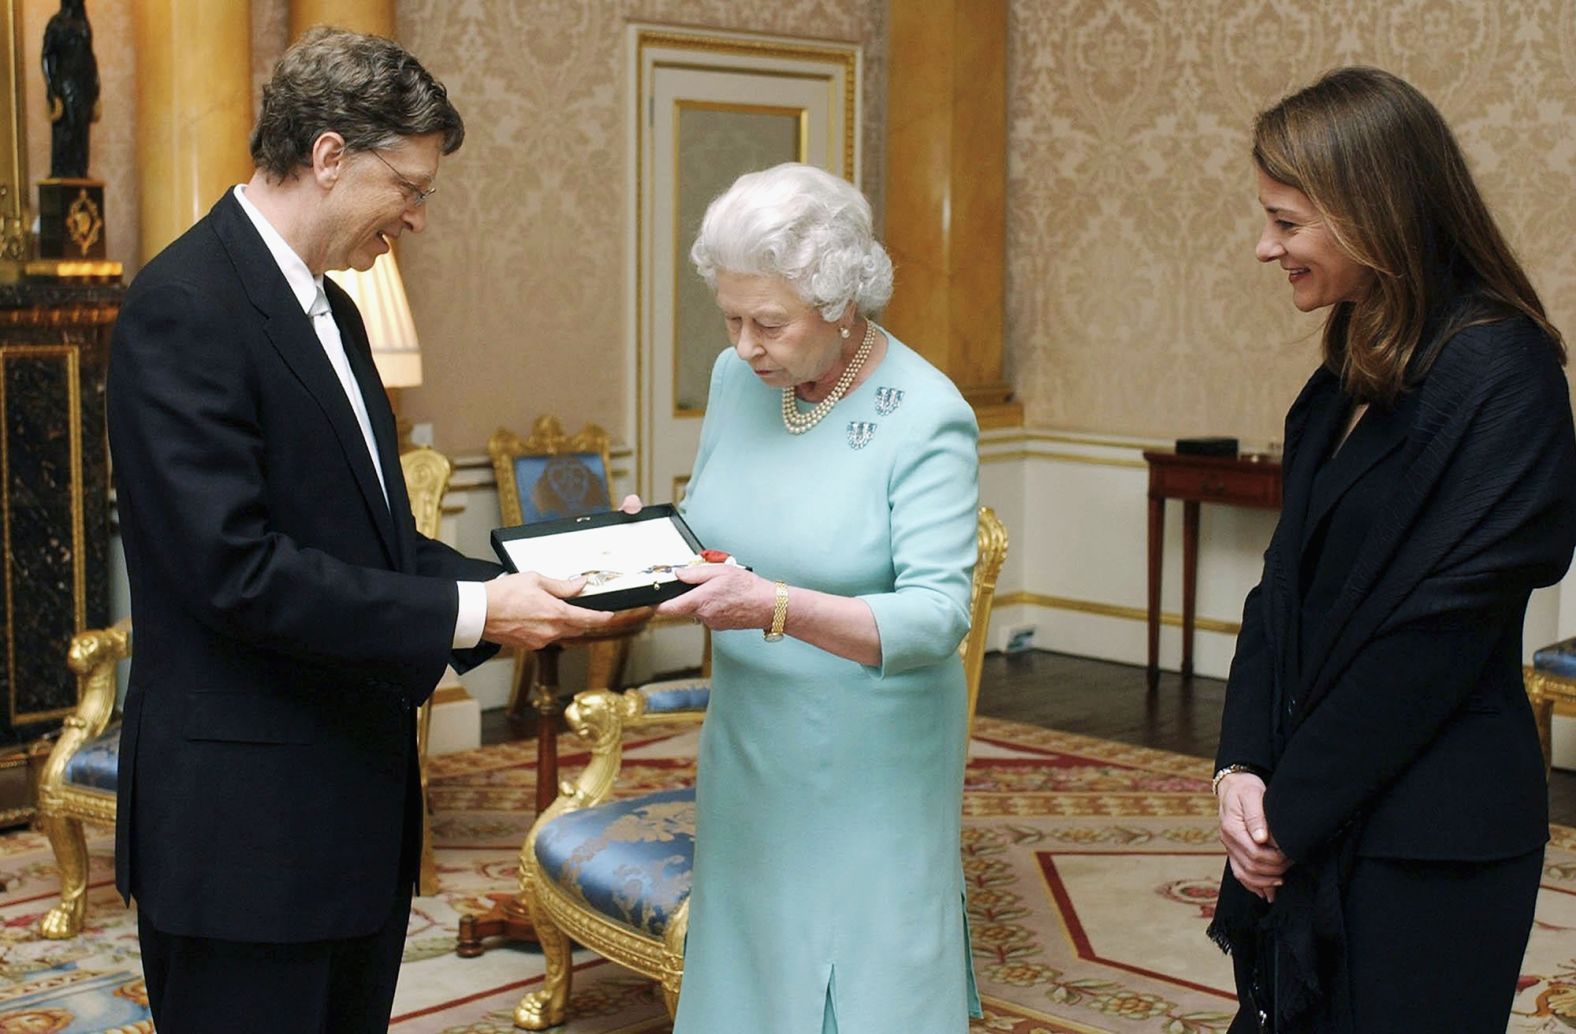 The Gateses meet with Britain's Queen Elizabeth II in 2005. Bill was awarded an honorary knighthood in recognition of his outstanding contributions to enterprise and to poverty reduction.